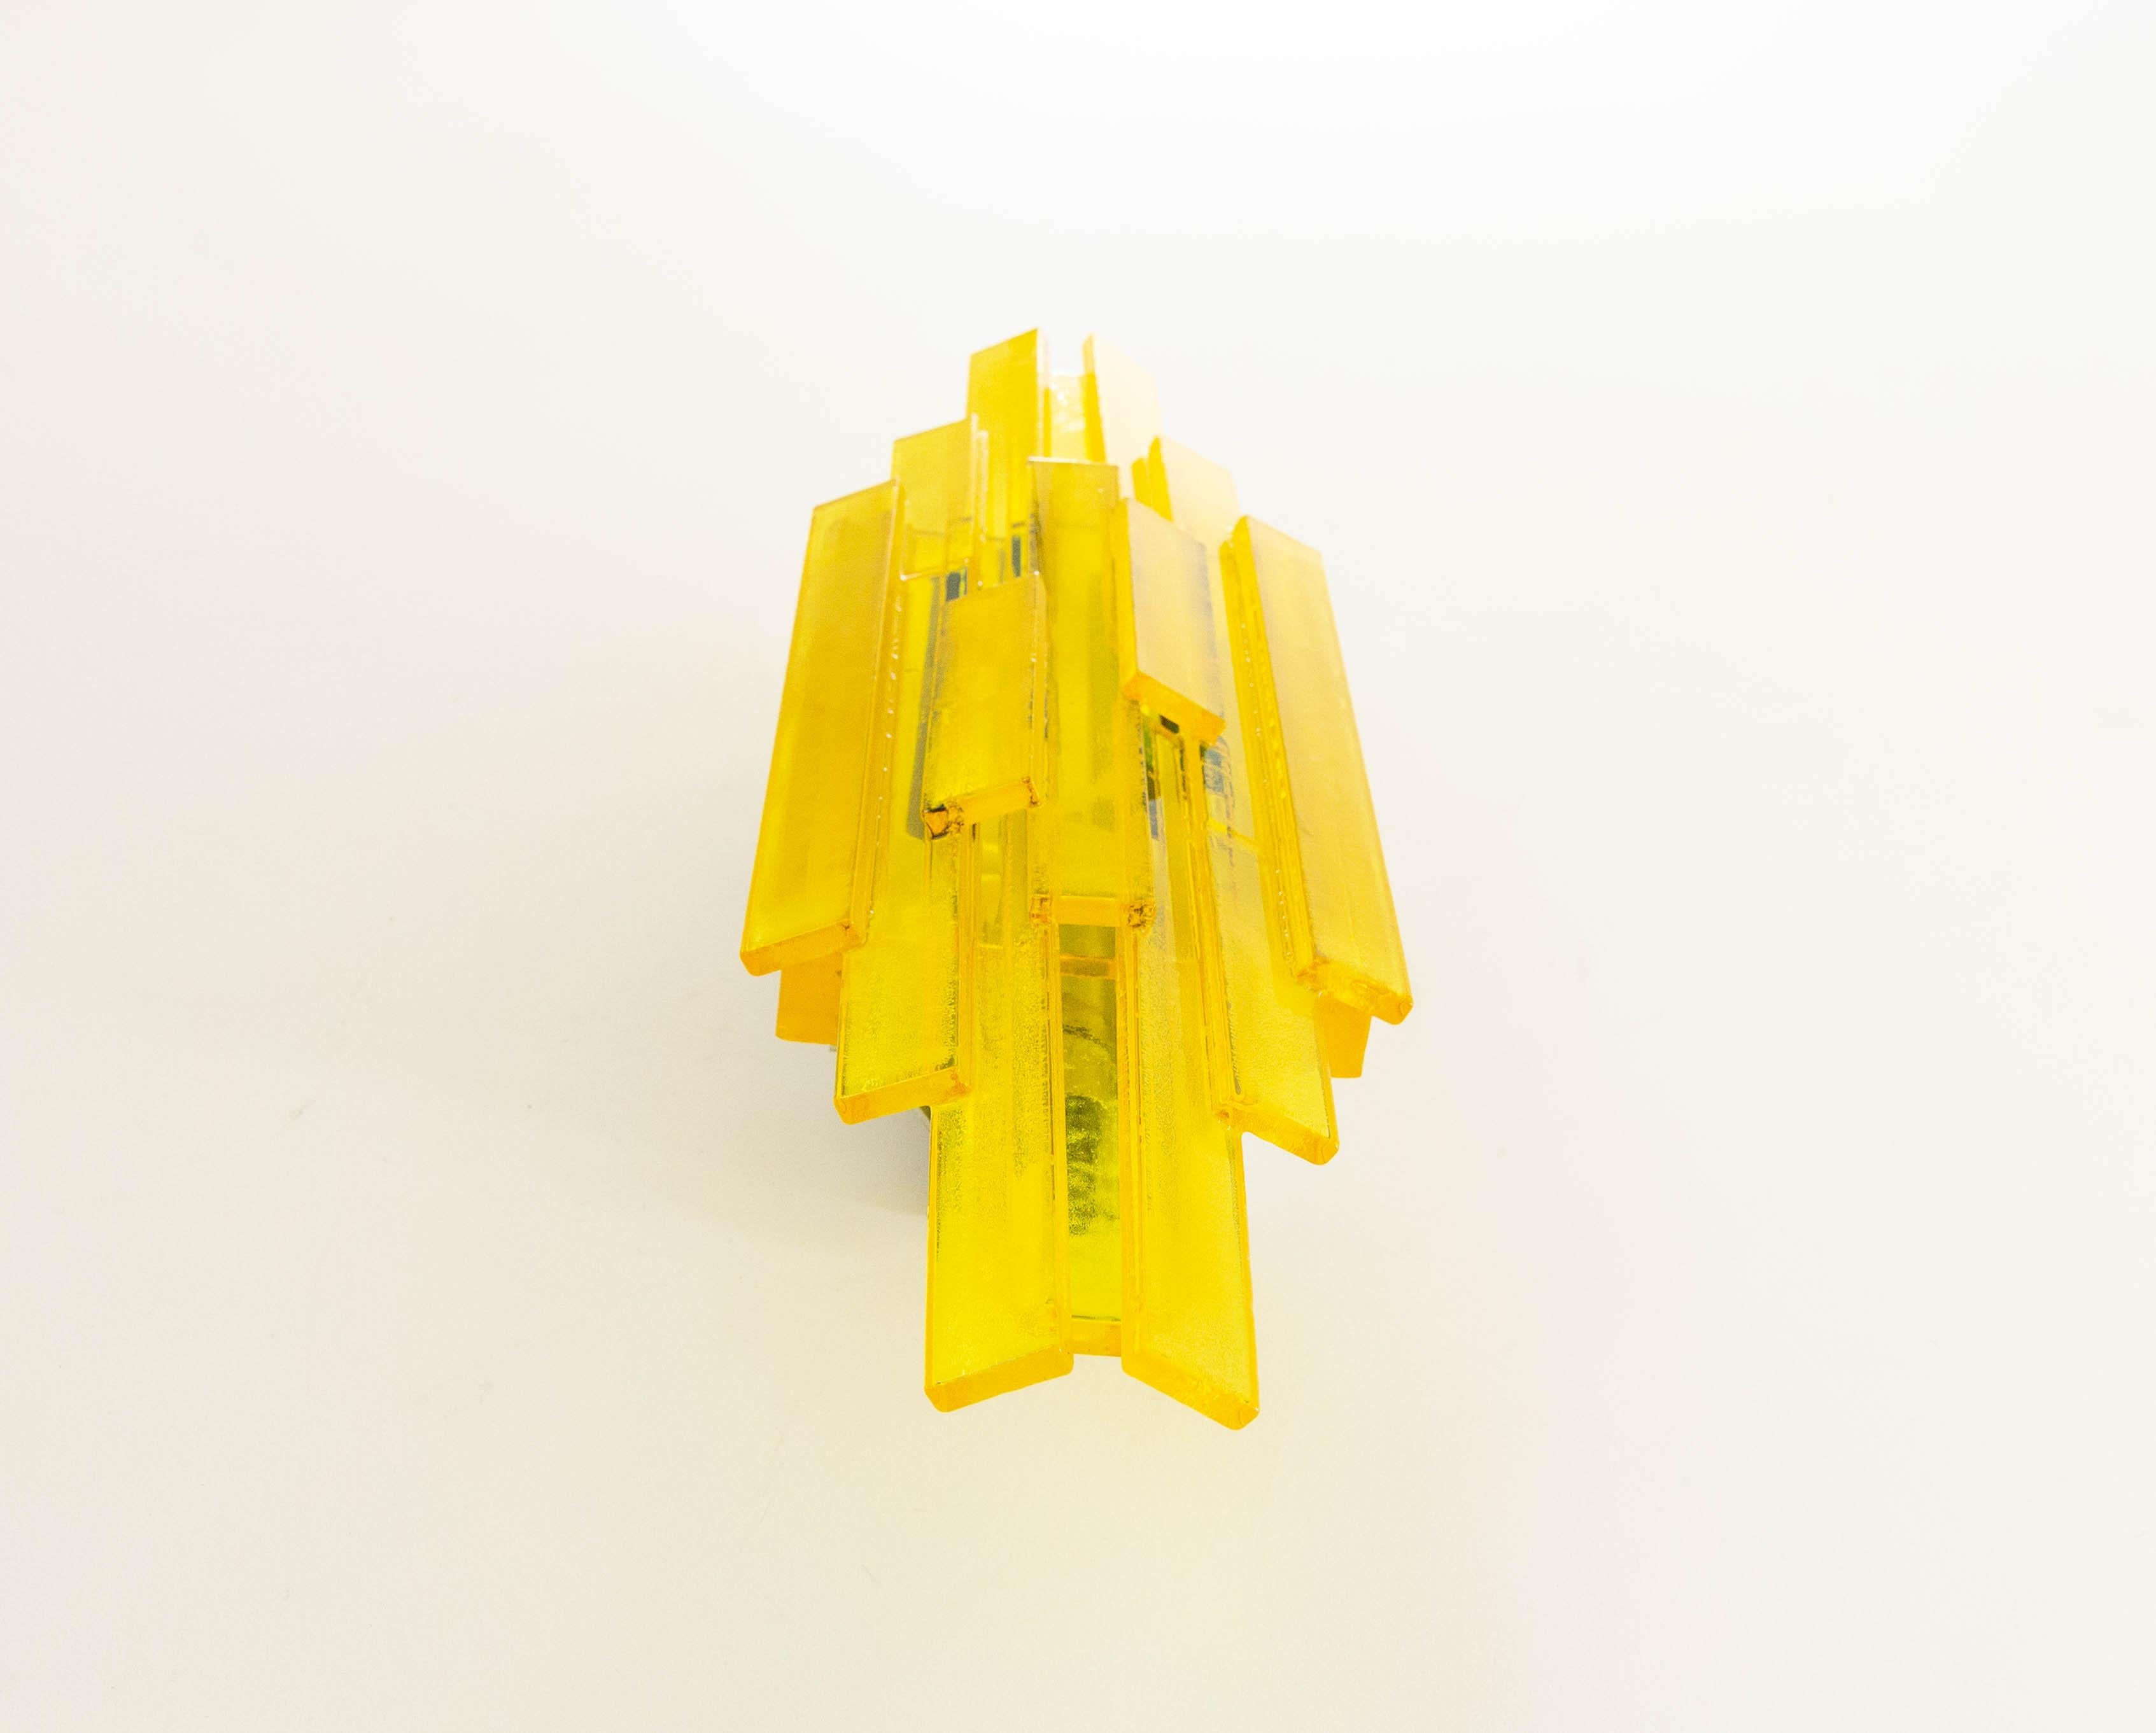 Scandinavian Modern Pair of Yellow Acrylic Wall Lamps by Claus Bolby for Cebo Industri, 1960's For Sale